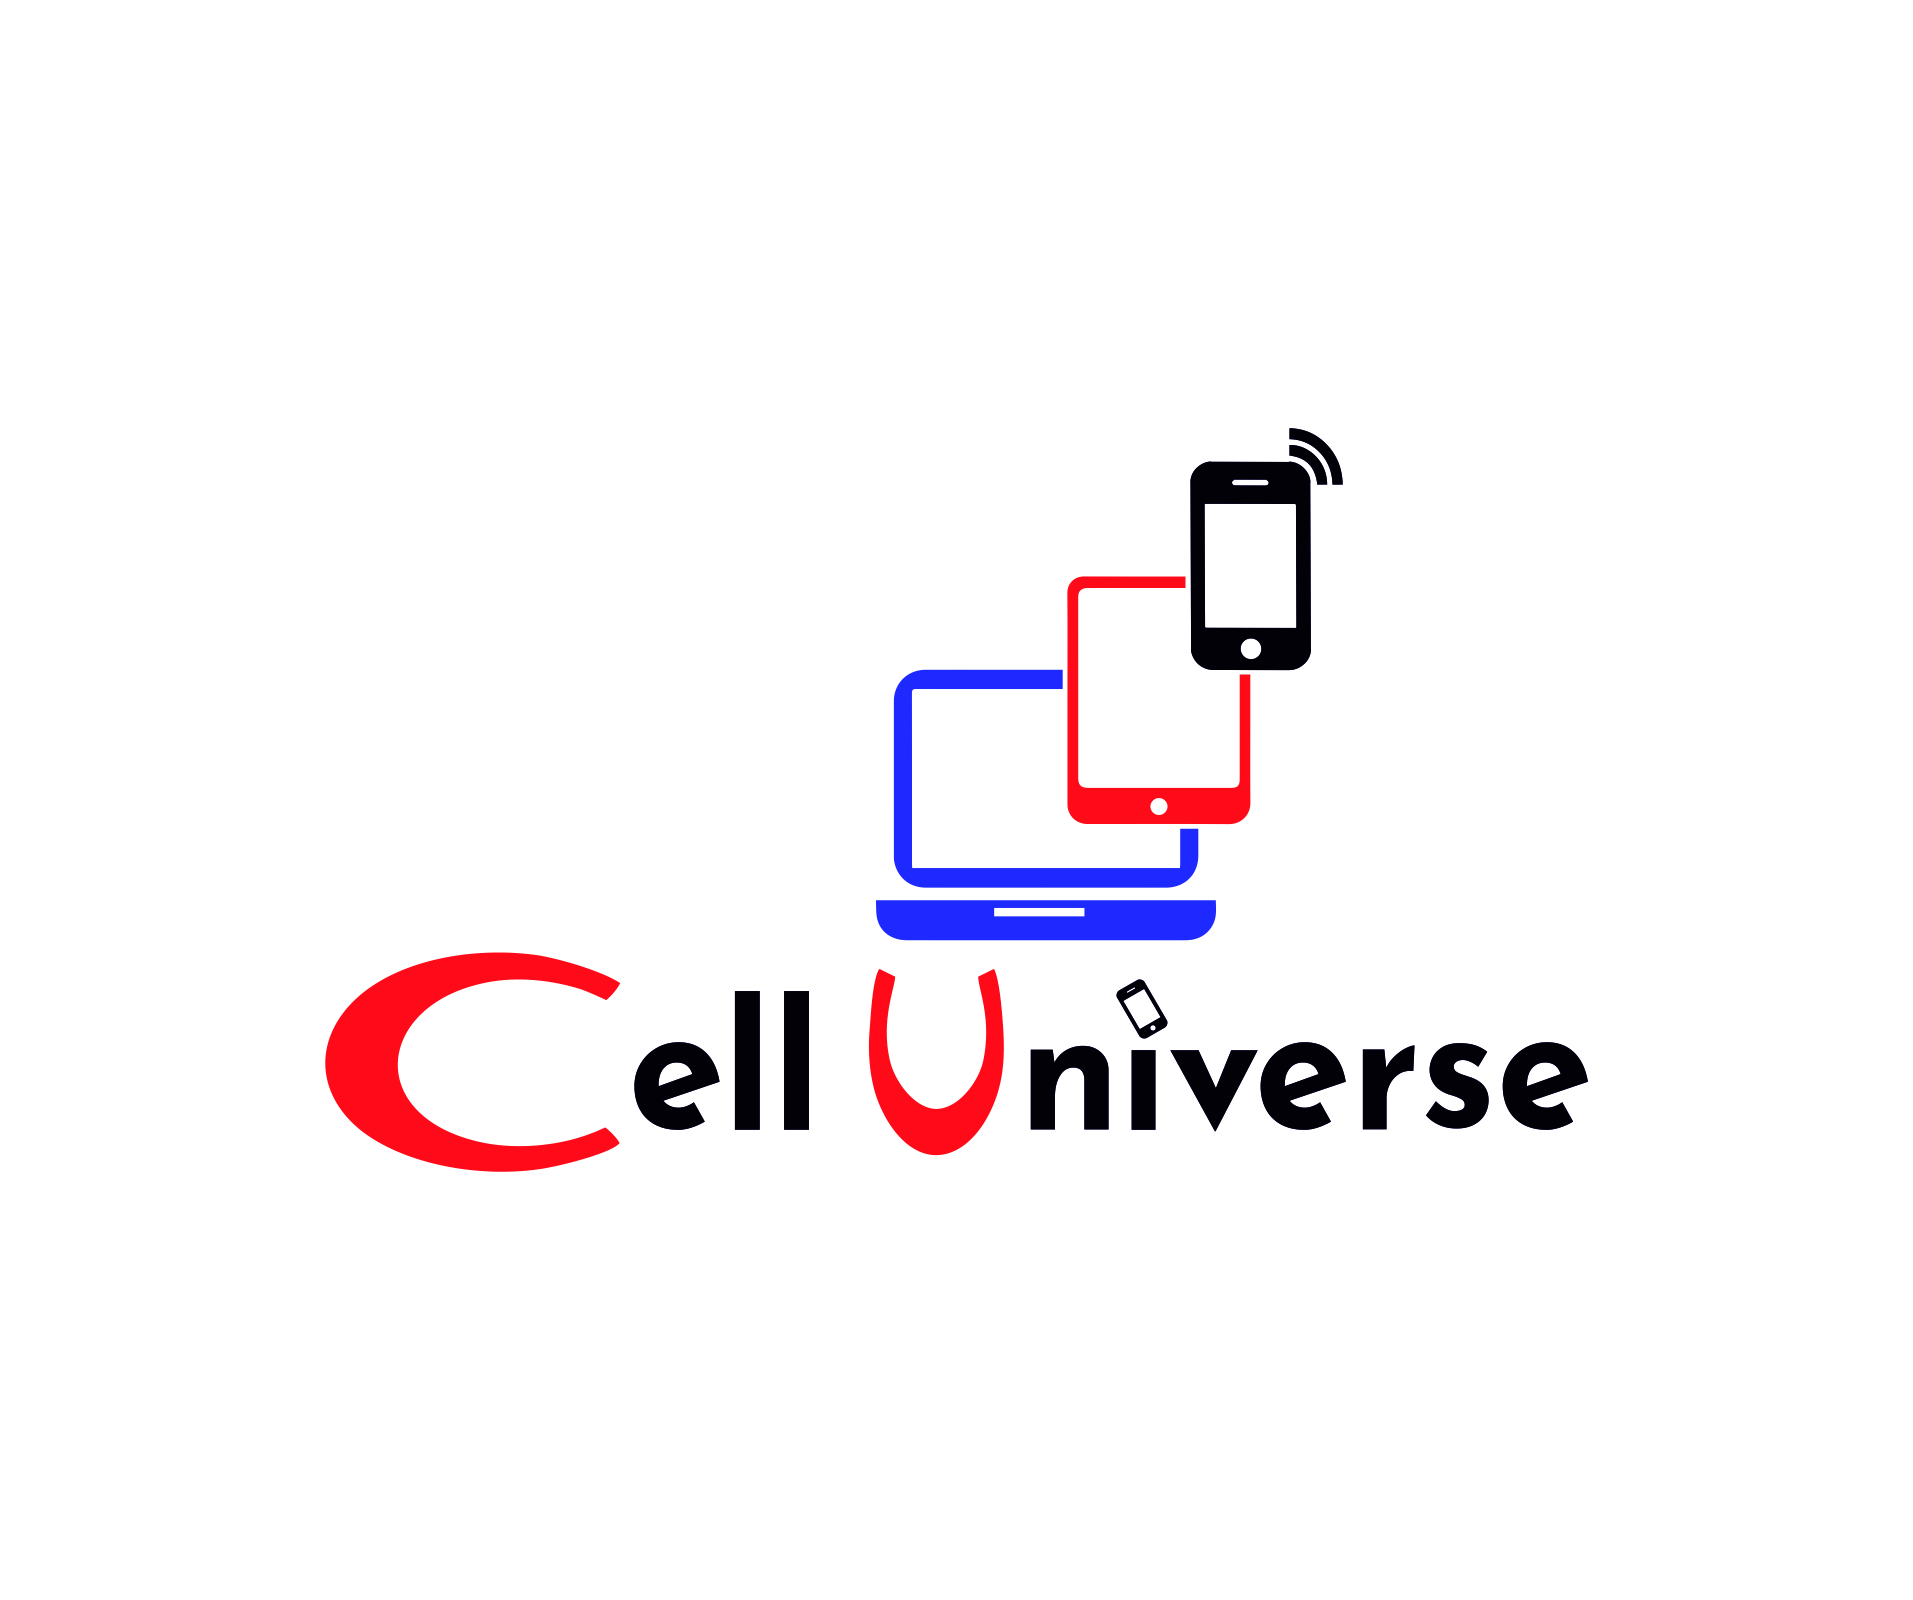 Cell Universe